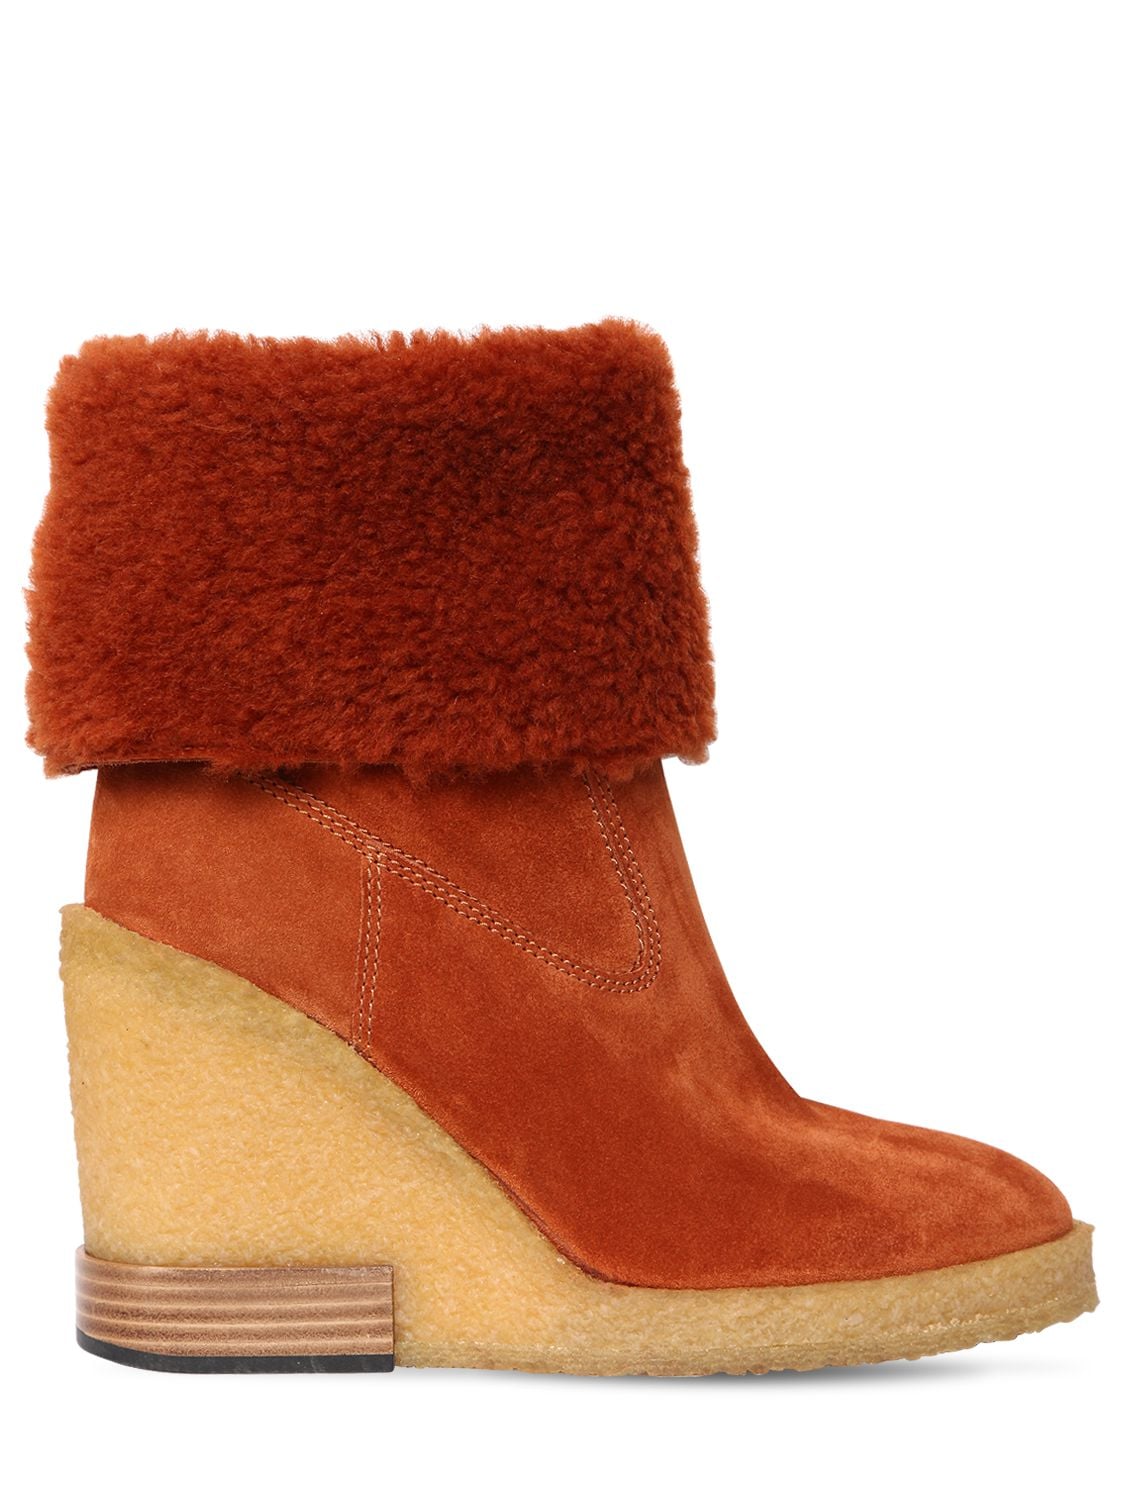 TOD'S 85MM SHEARLING & SUEDE BOOTS,68I83U001-RZGYNQ2